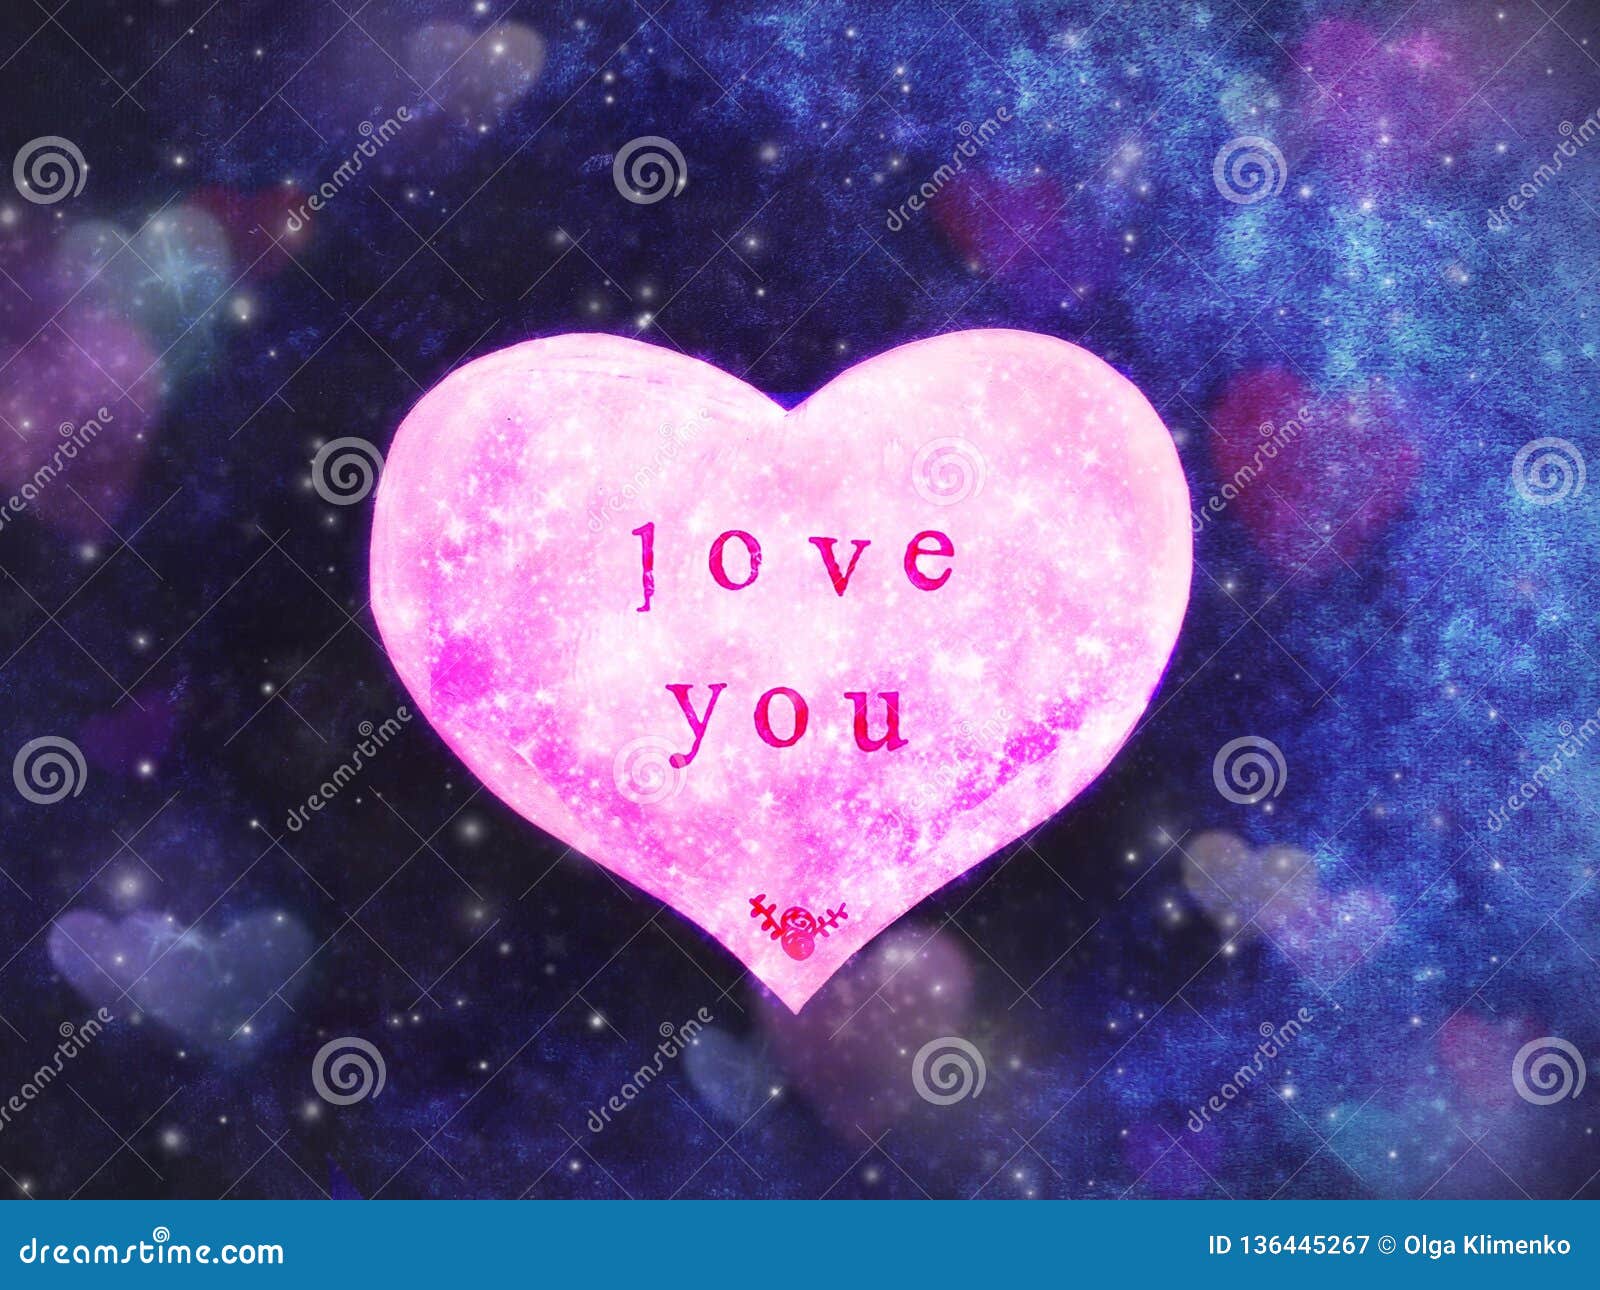 1 466 Cosmic Love Photos Free Royalty Free Stock Photos From Dreamstime